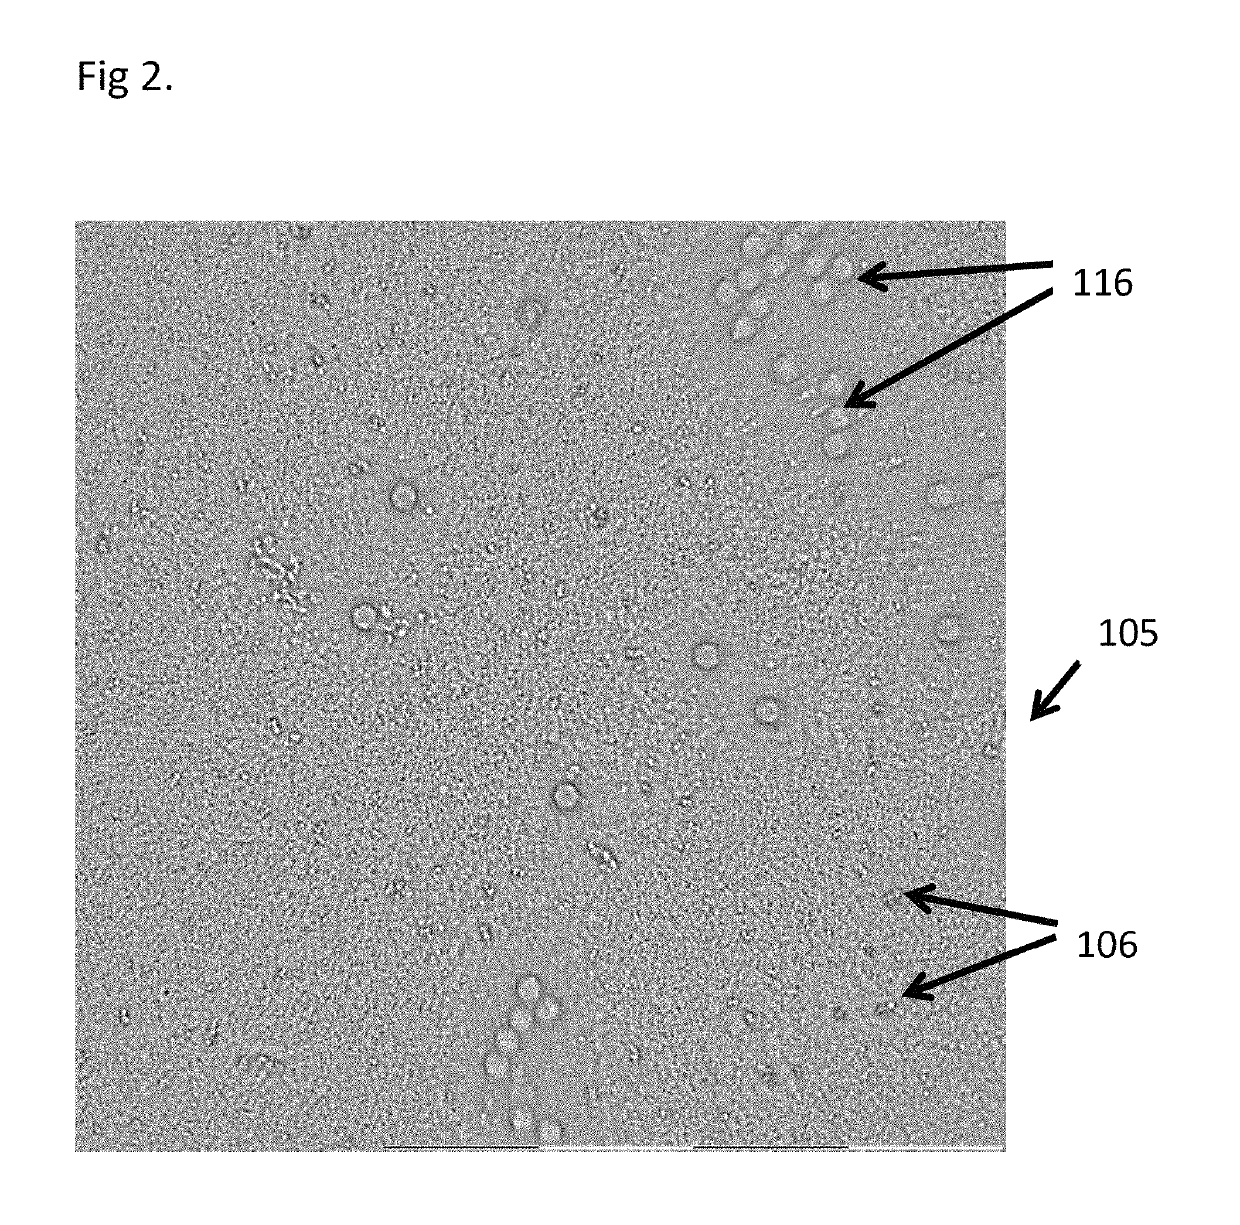 Method for quantification of purity of sub-visible particle samples